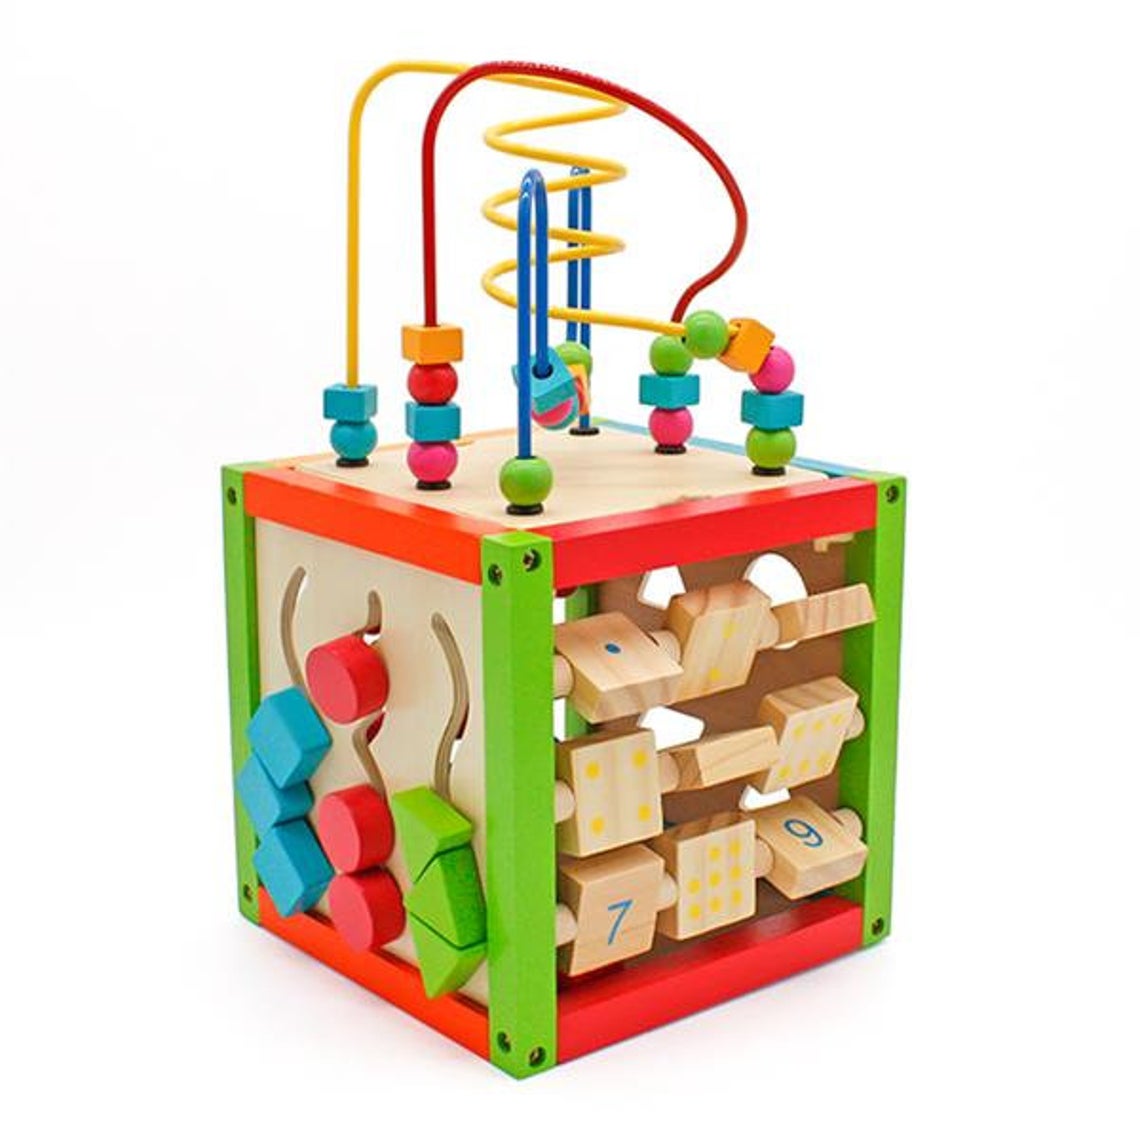 Wooden Learning Bead Maze Cube 5 in 1 Activity Center Educational Toy, gifts for 1 year old - TOYSHIP